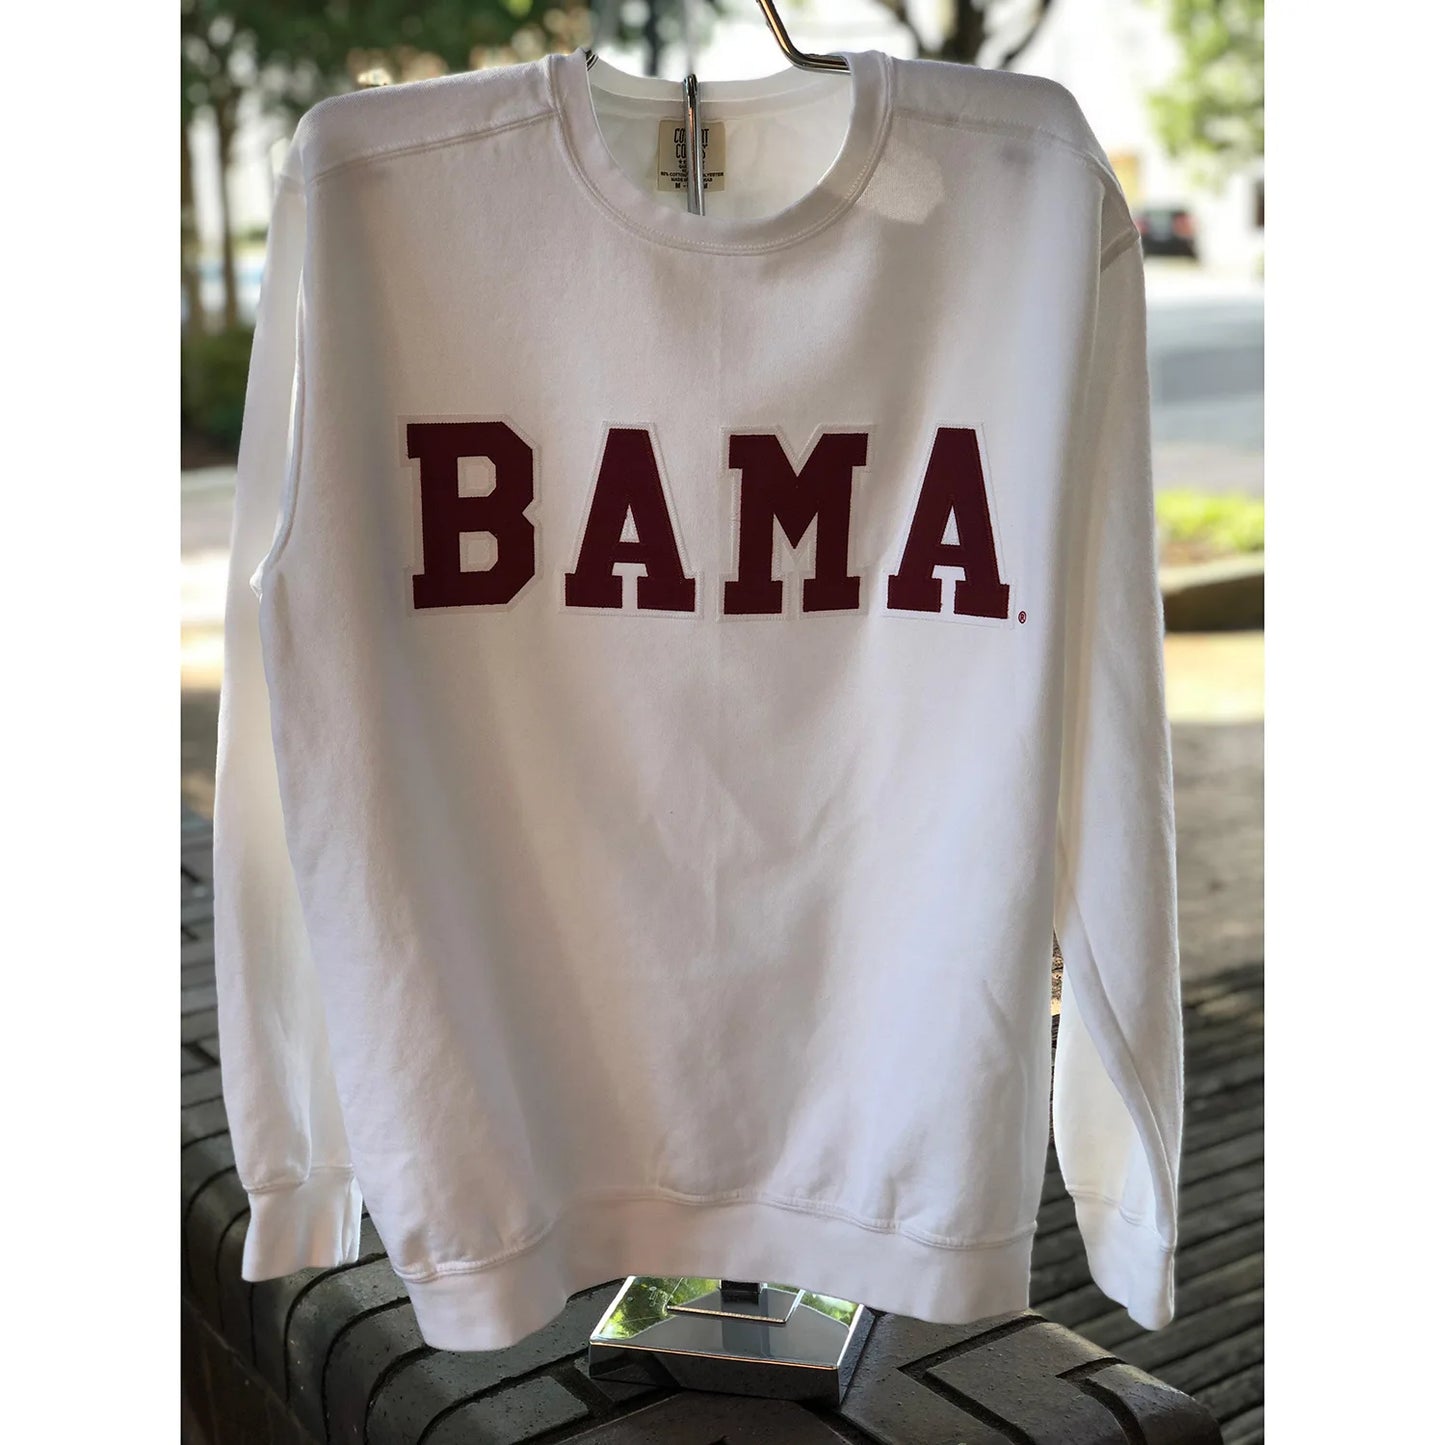 Custom White Alabama Sweatshirt with BAMA across chest in applique letters